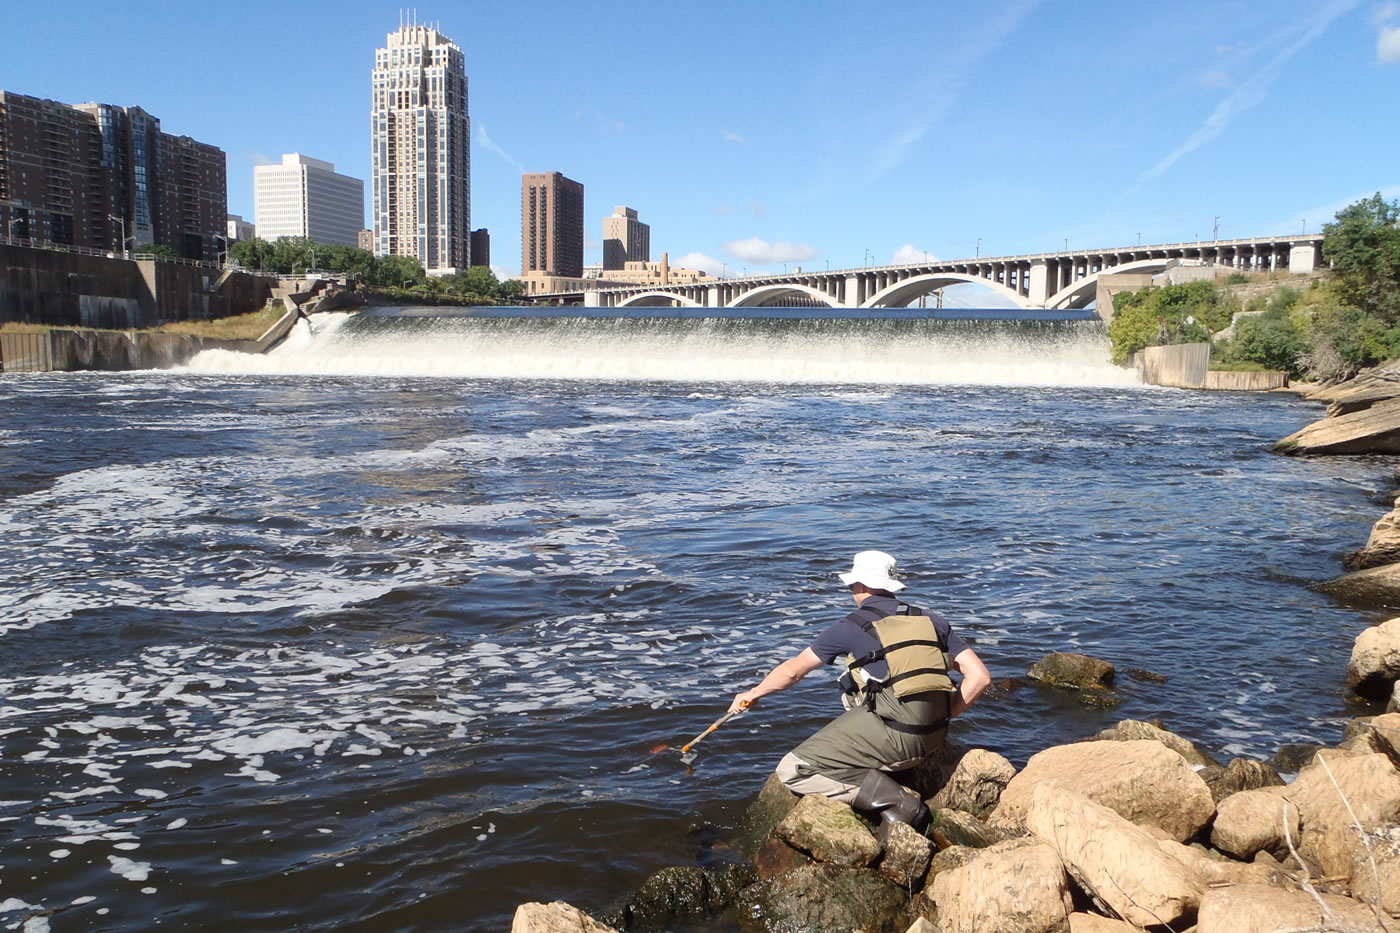 MWMO Environmental Specialist Brian Jastram collects a water sample near the University of Minnesota's St. Anthony Falls Laboratory.